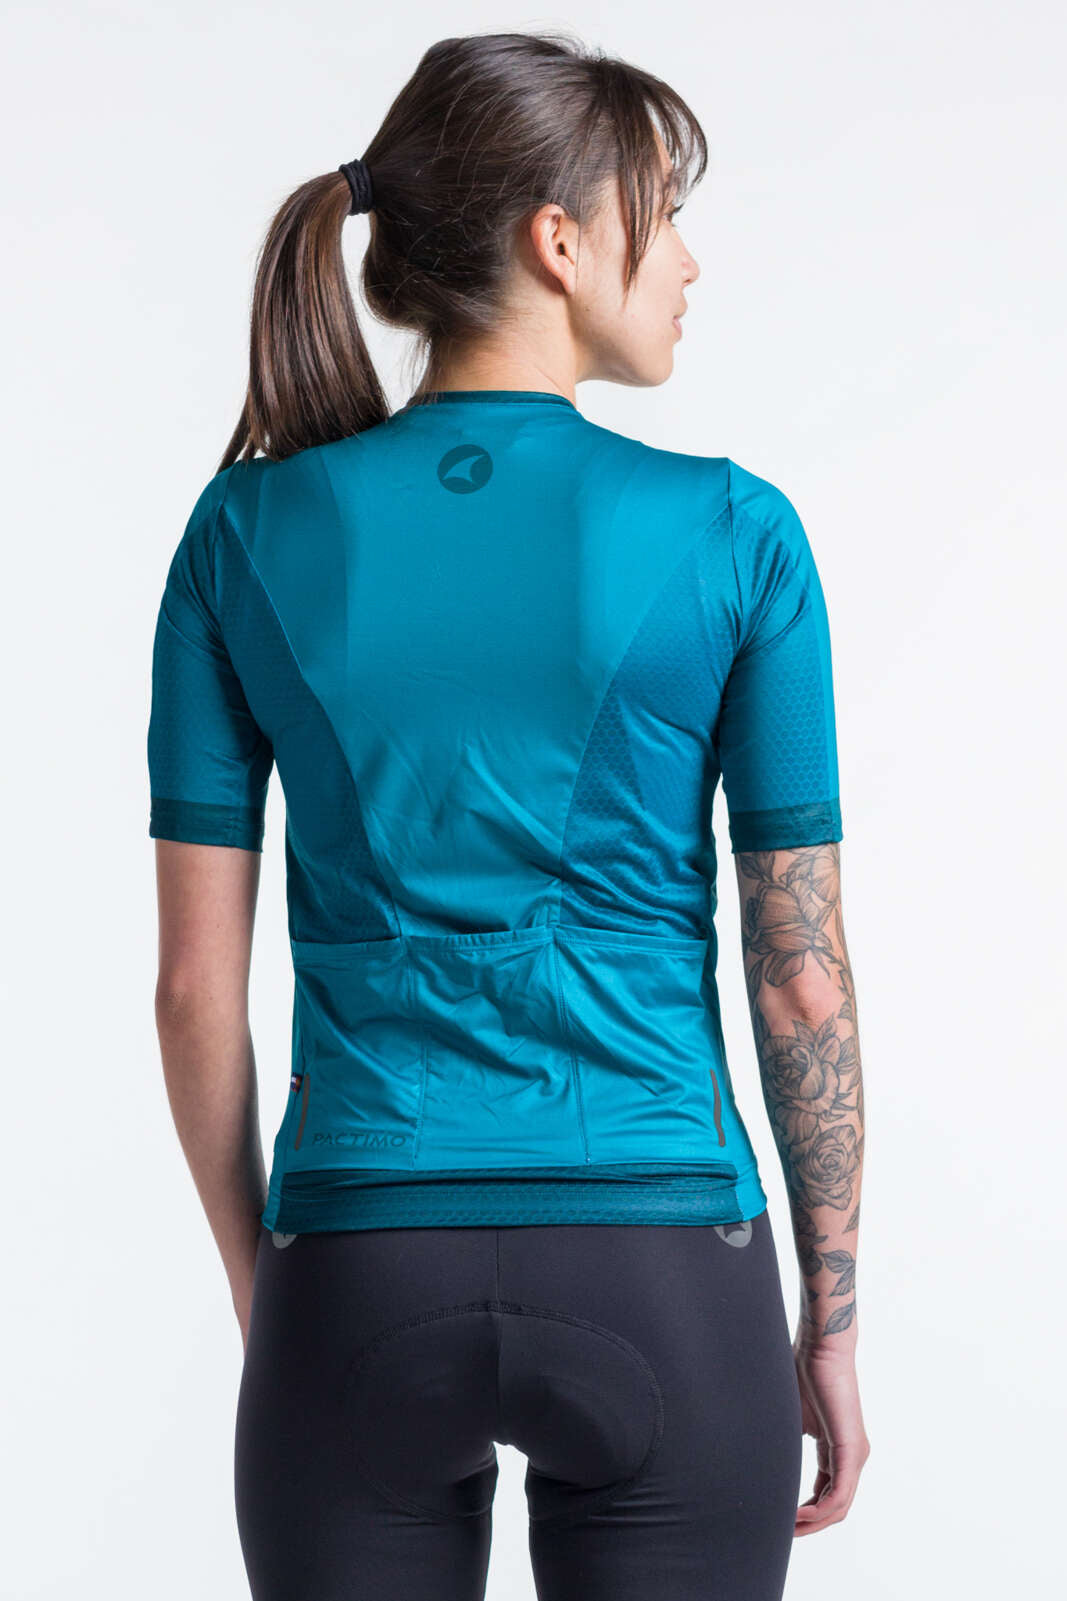 Women's Best Teal Cycling Jersey - Summit Back View